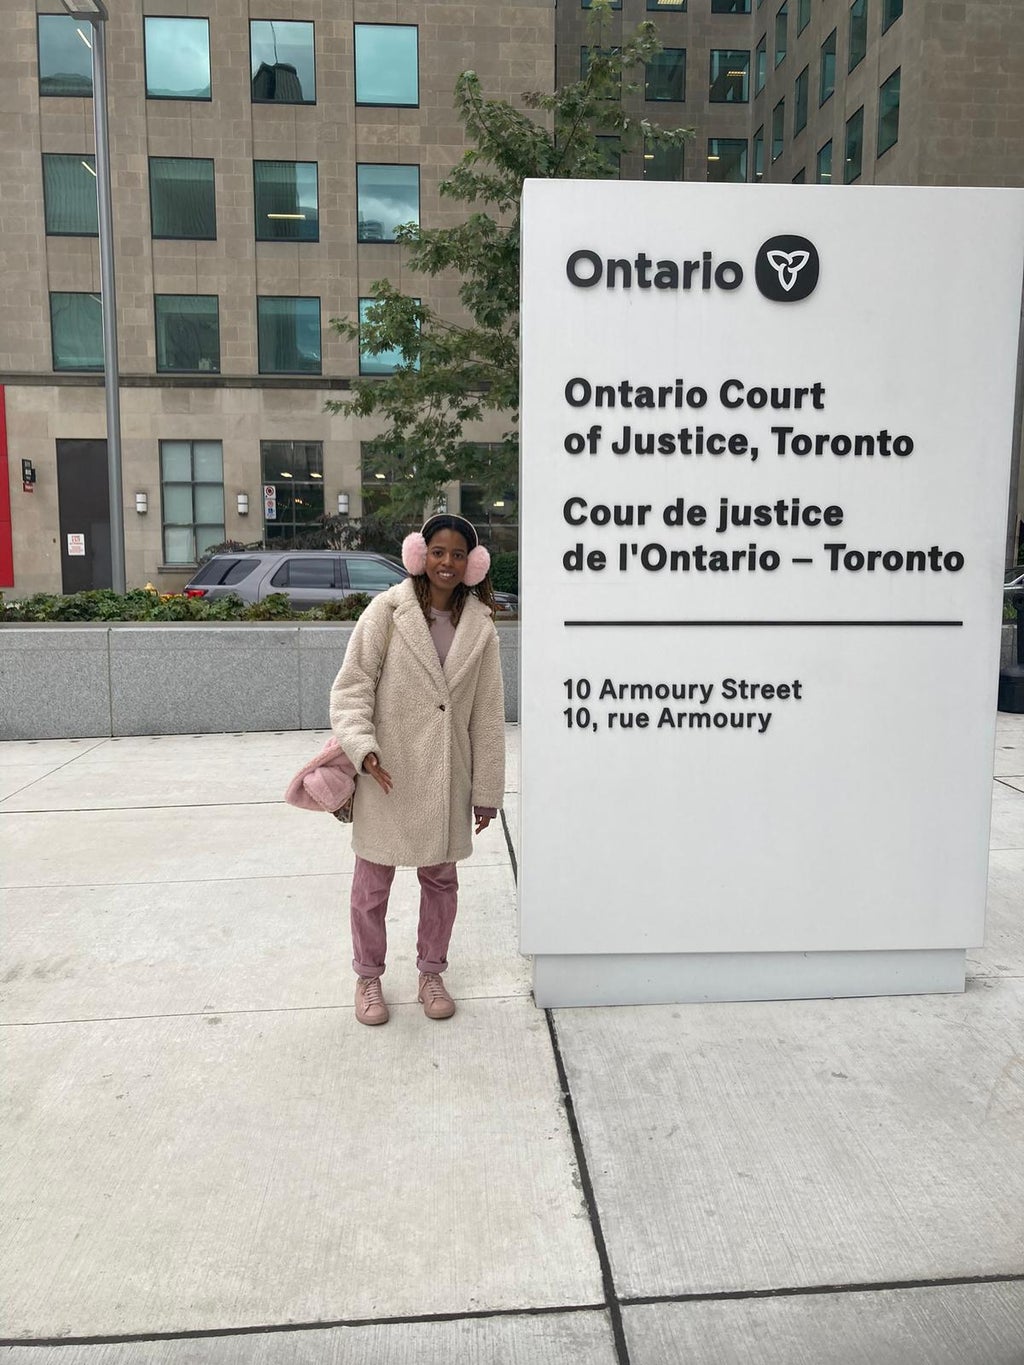 Girl in front of Ontario Court of Justice